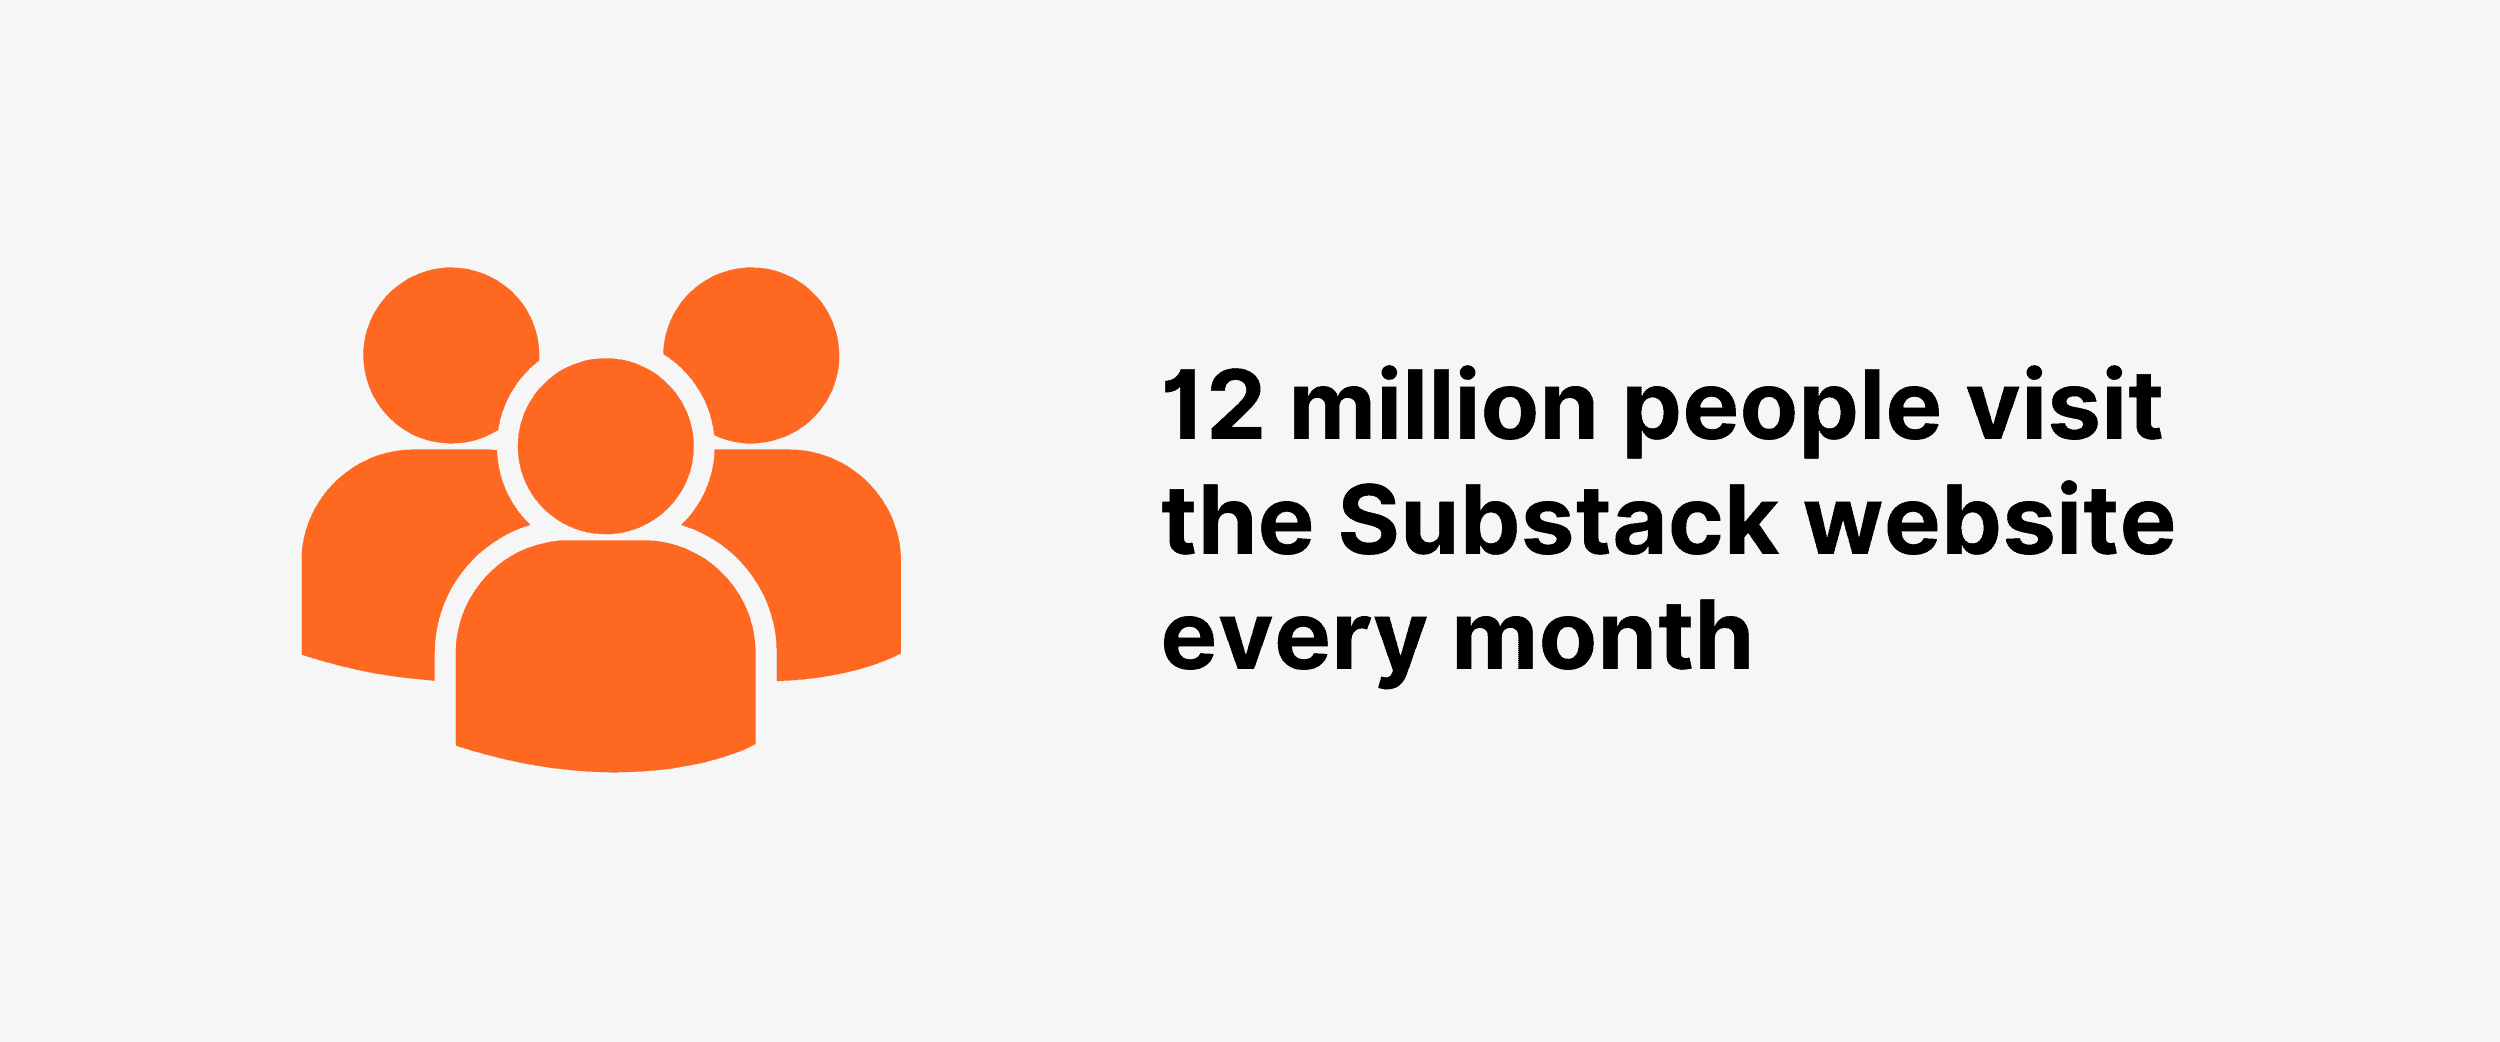 12 million people visit the Substack website every month